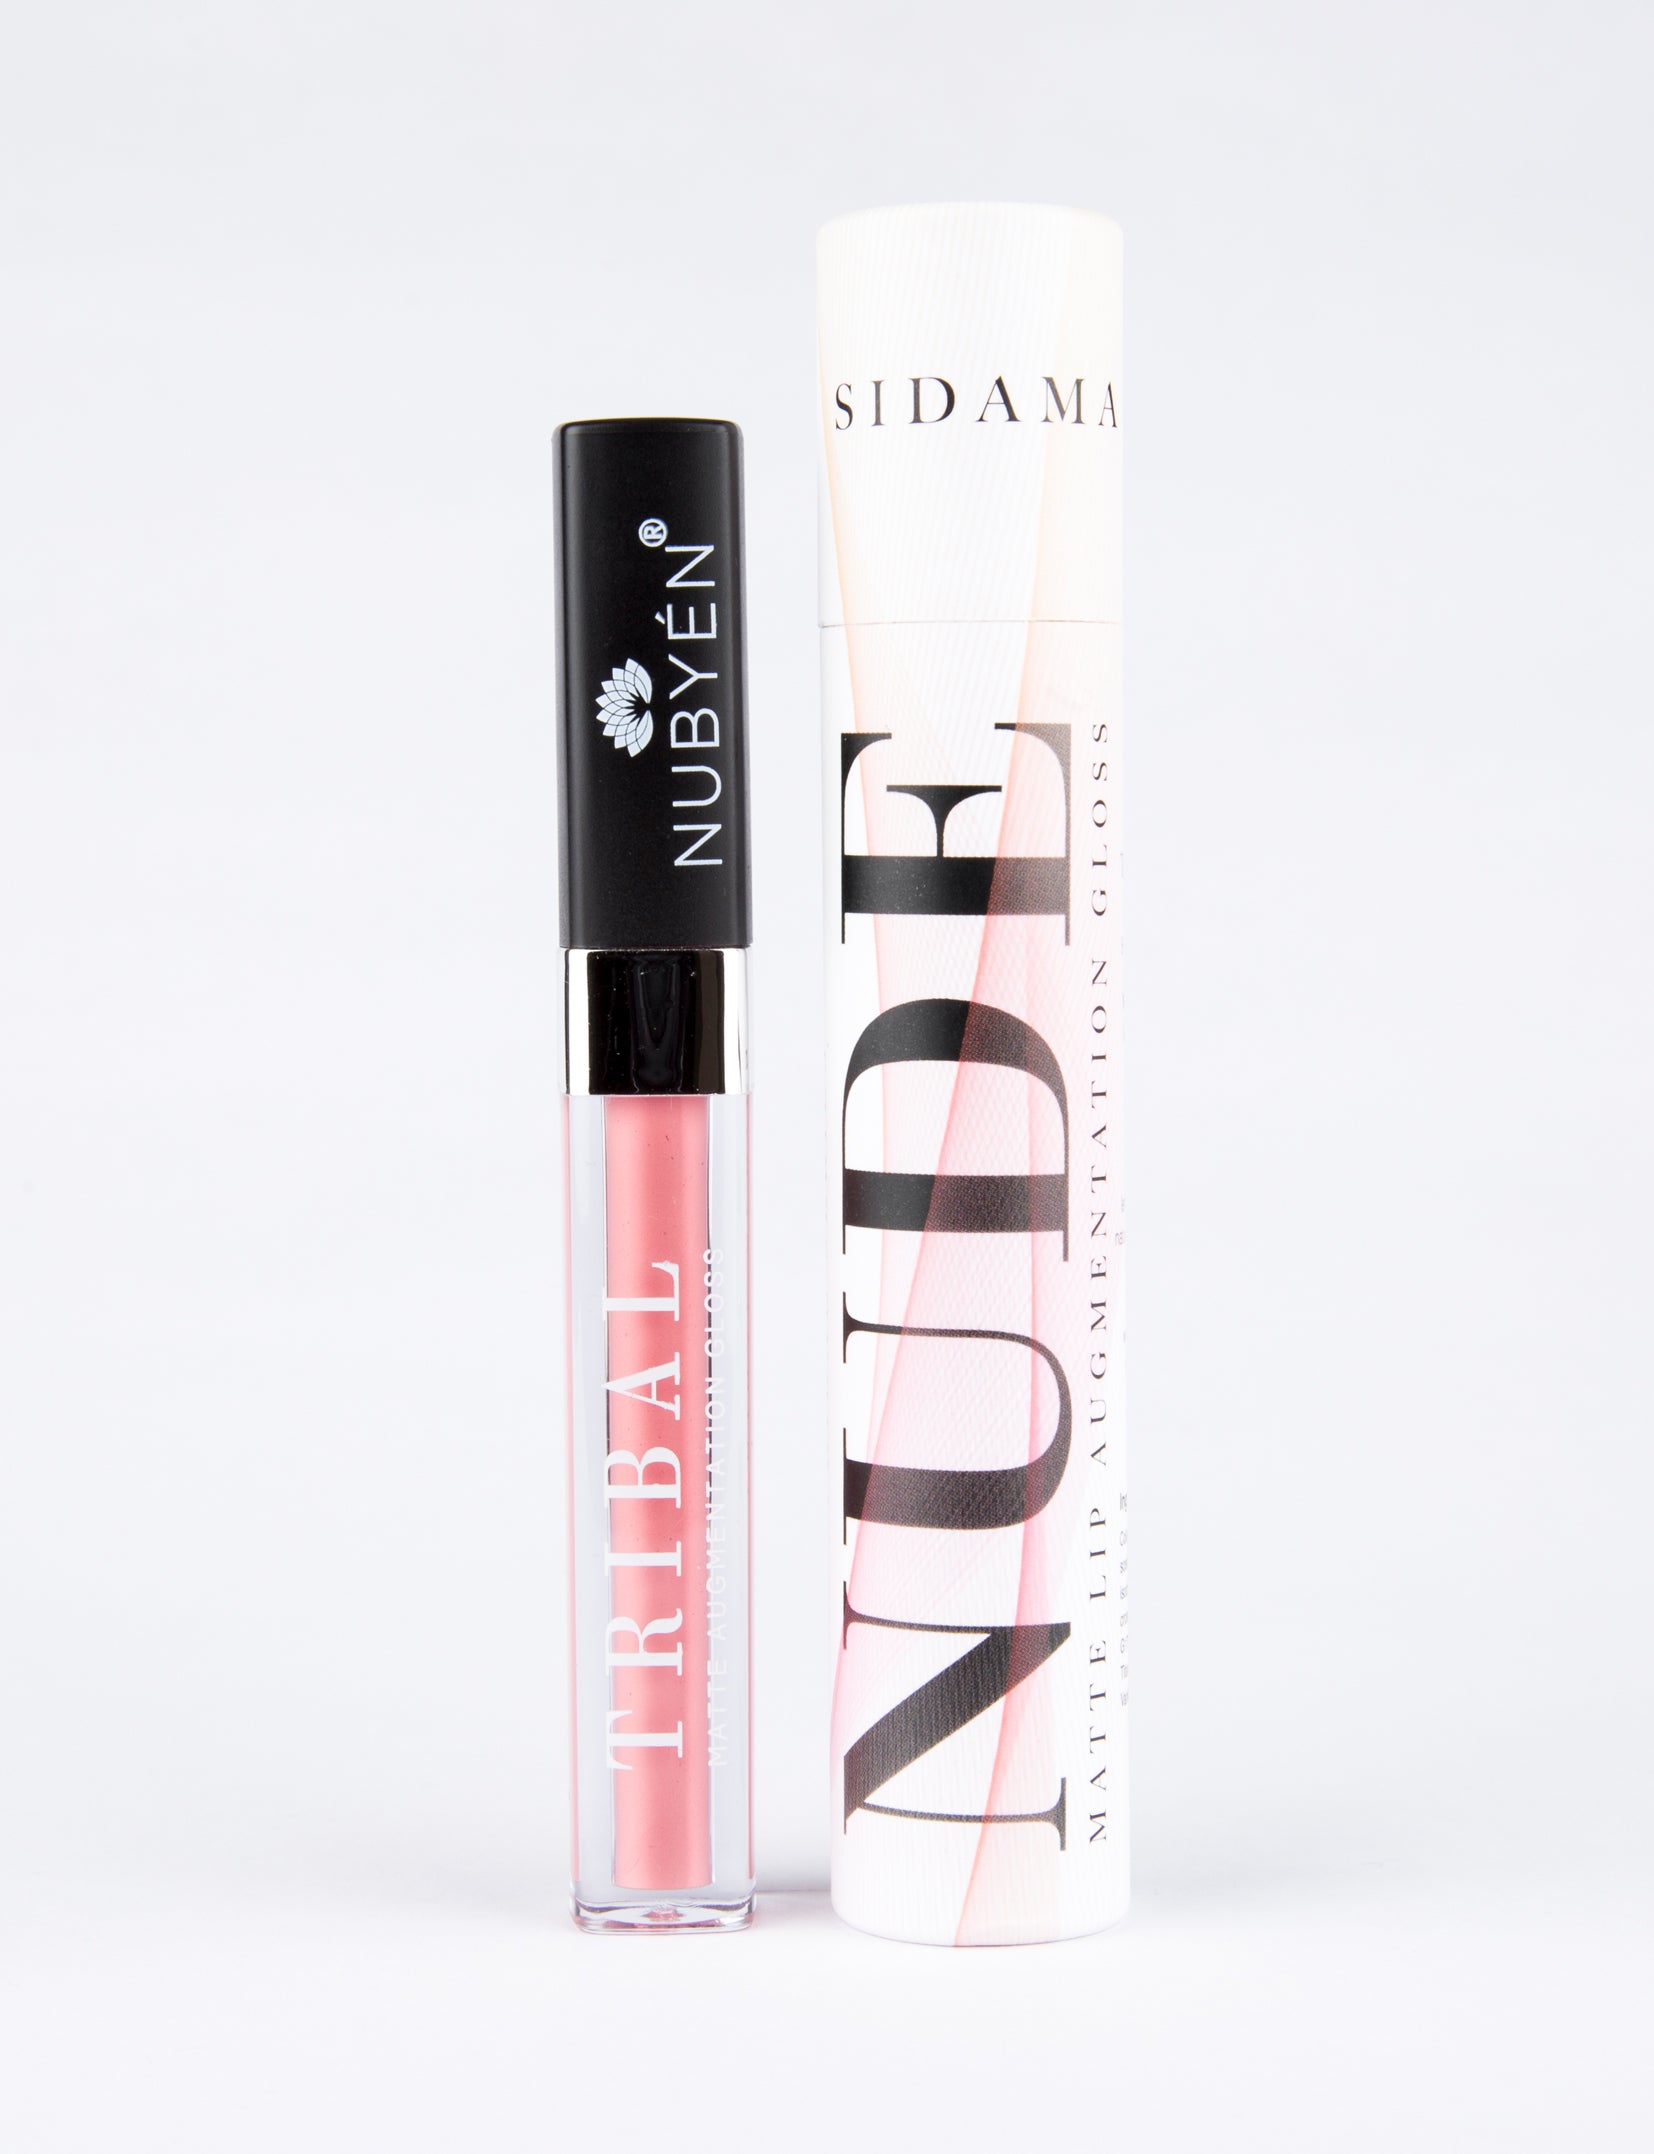 This Lip plumping gloss , its our best selling  matte vegan and cruelty free lip plumping gloss for fuller lips instantly, has natural ingredients such as collagen & hyaluronic acid. its called tribal by nubyen nude, wunder2 wonderkiss, wunderkiss lip plumper , good lip plumper, milani lip plumper, lip  injections, do it yourself lip plumper, 